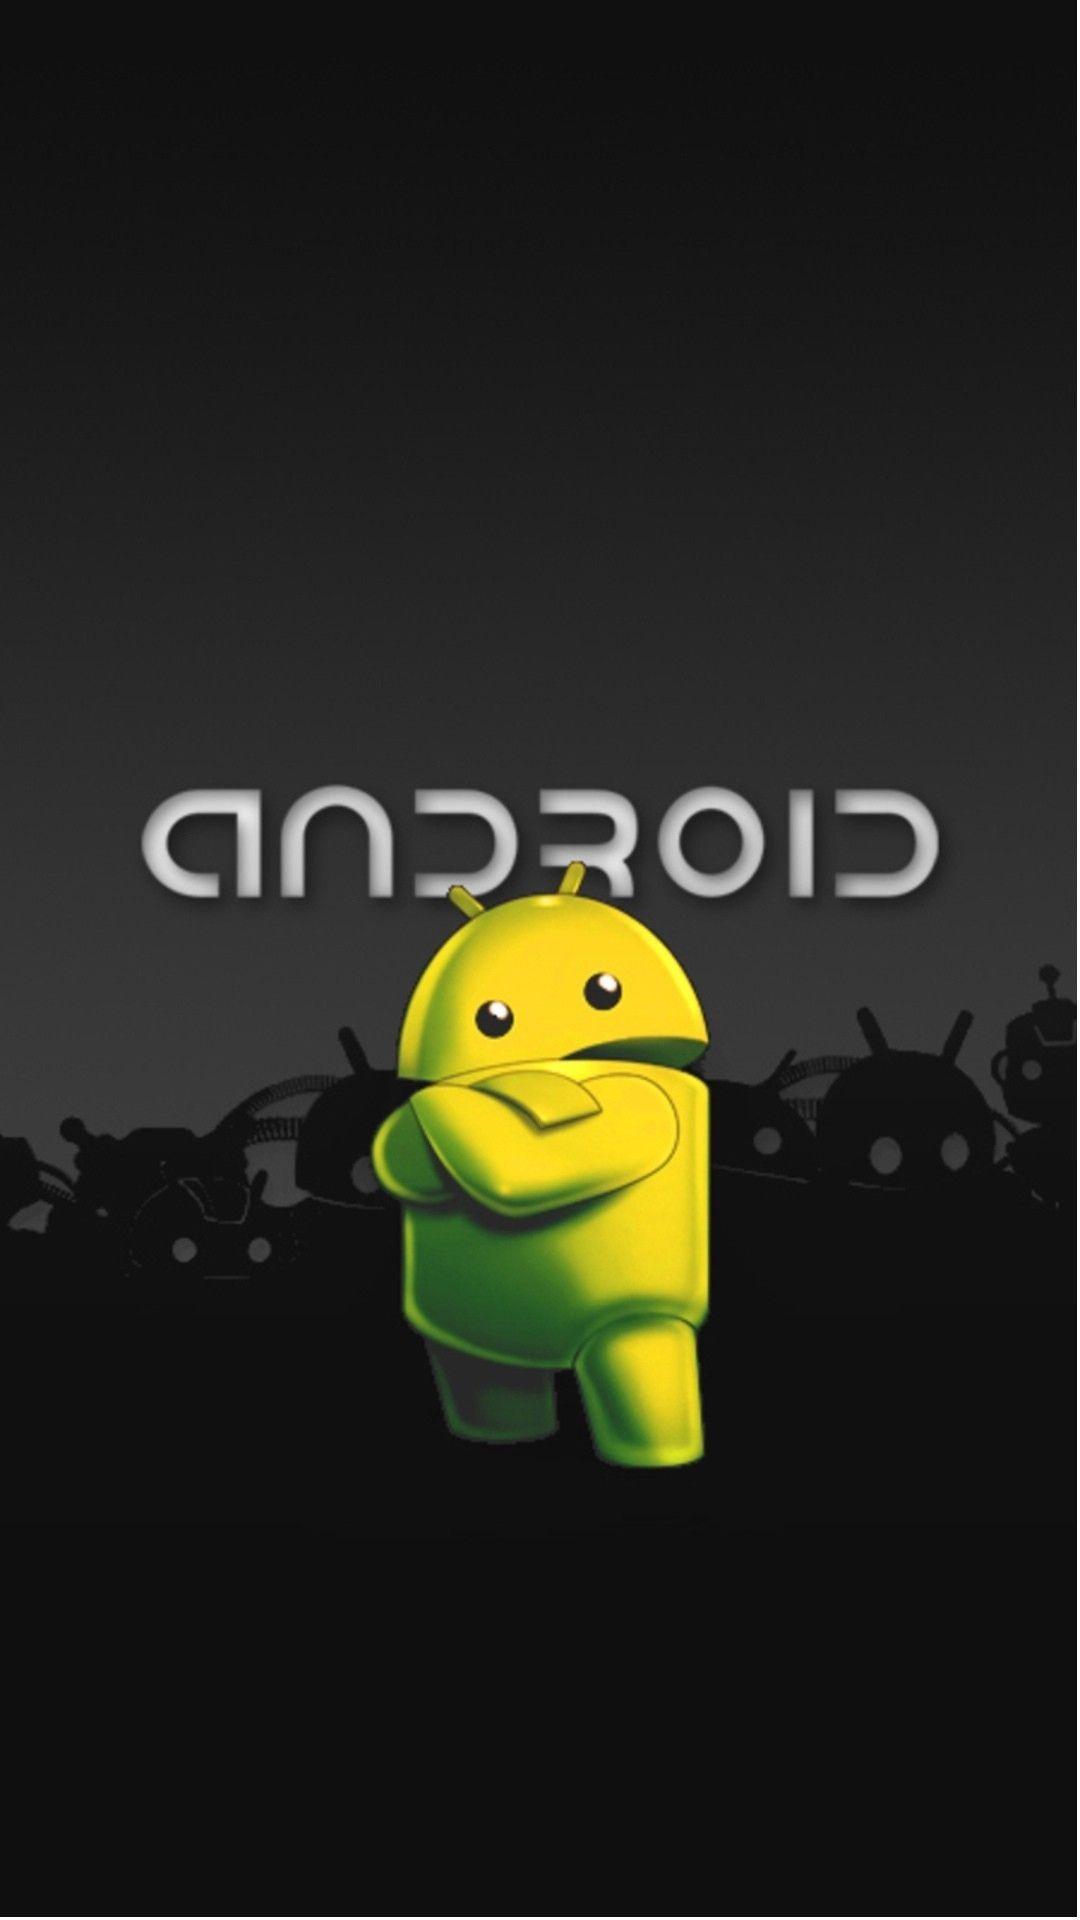 Cool Android Logo - 84+ Android Logo Wallpapers on WallpaperPlay